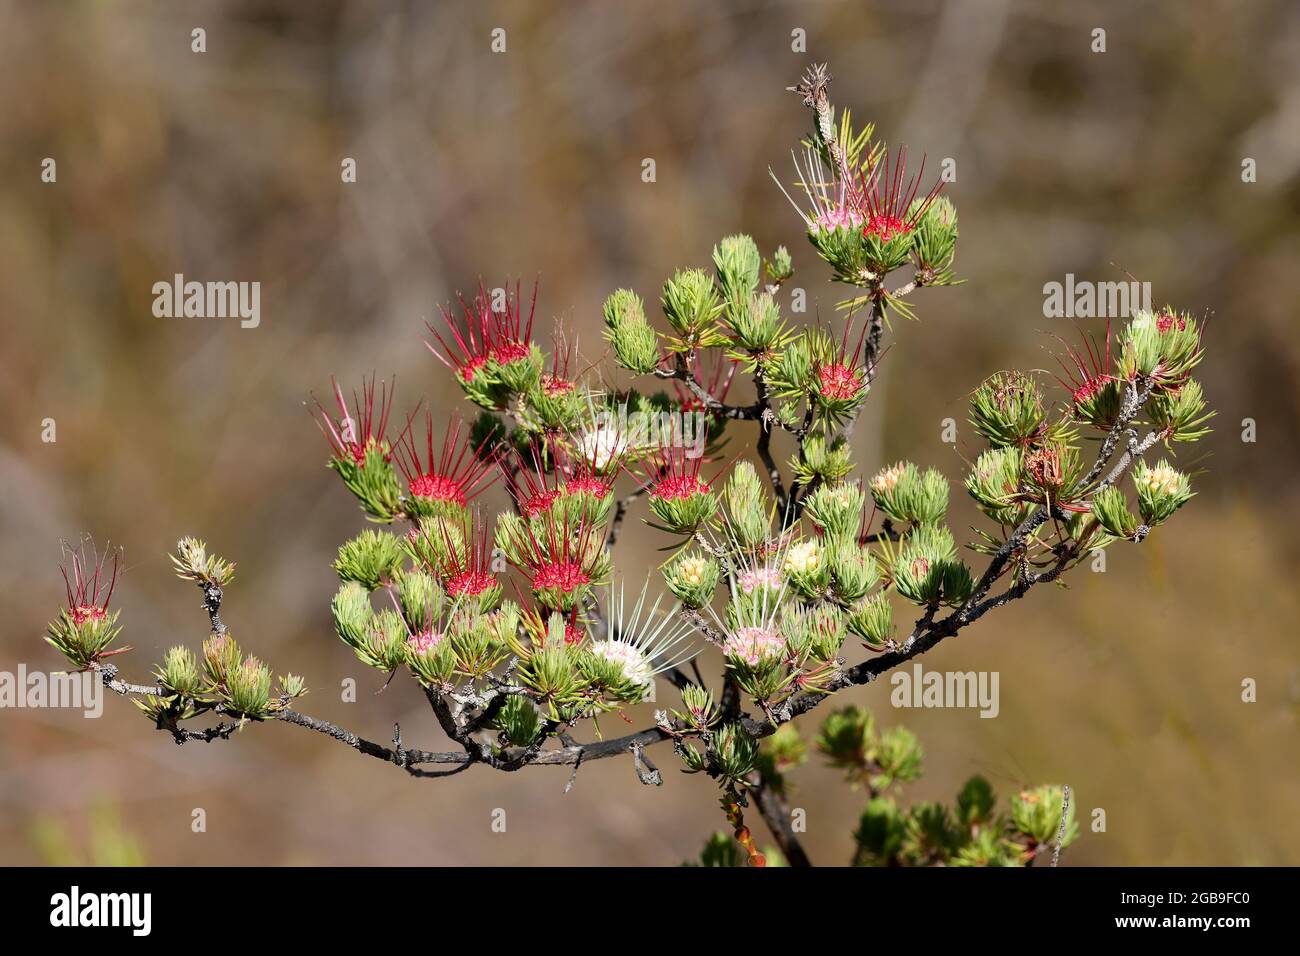 Clustered Scent Myrtle shrub in flower Stock Photo